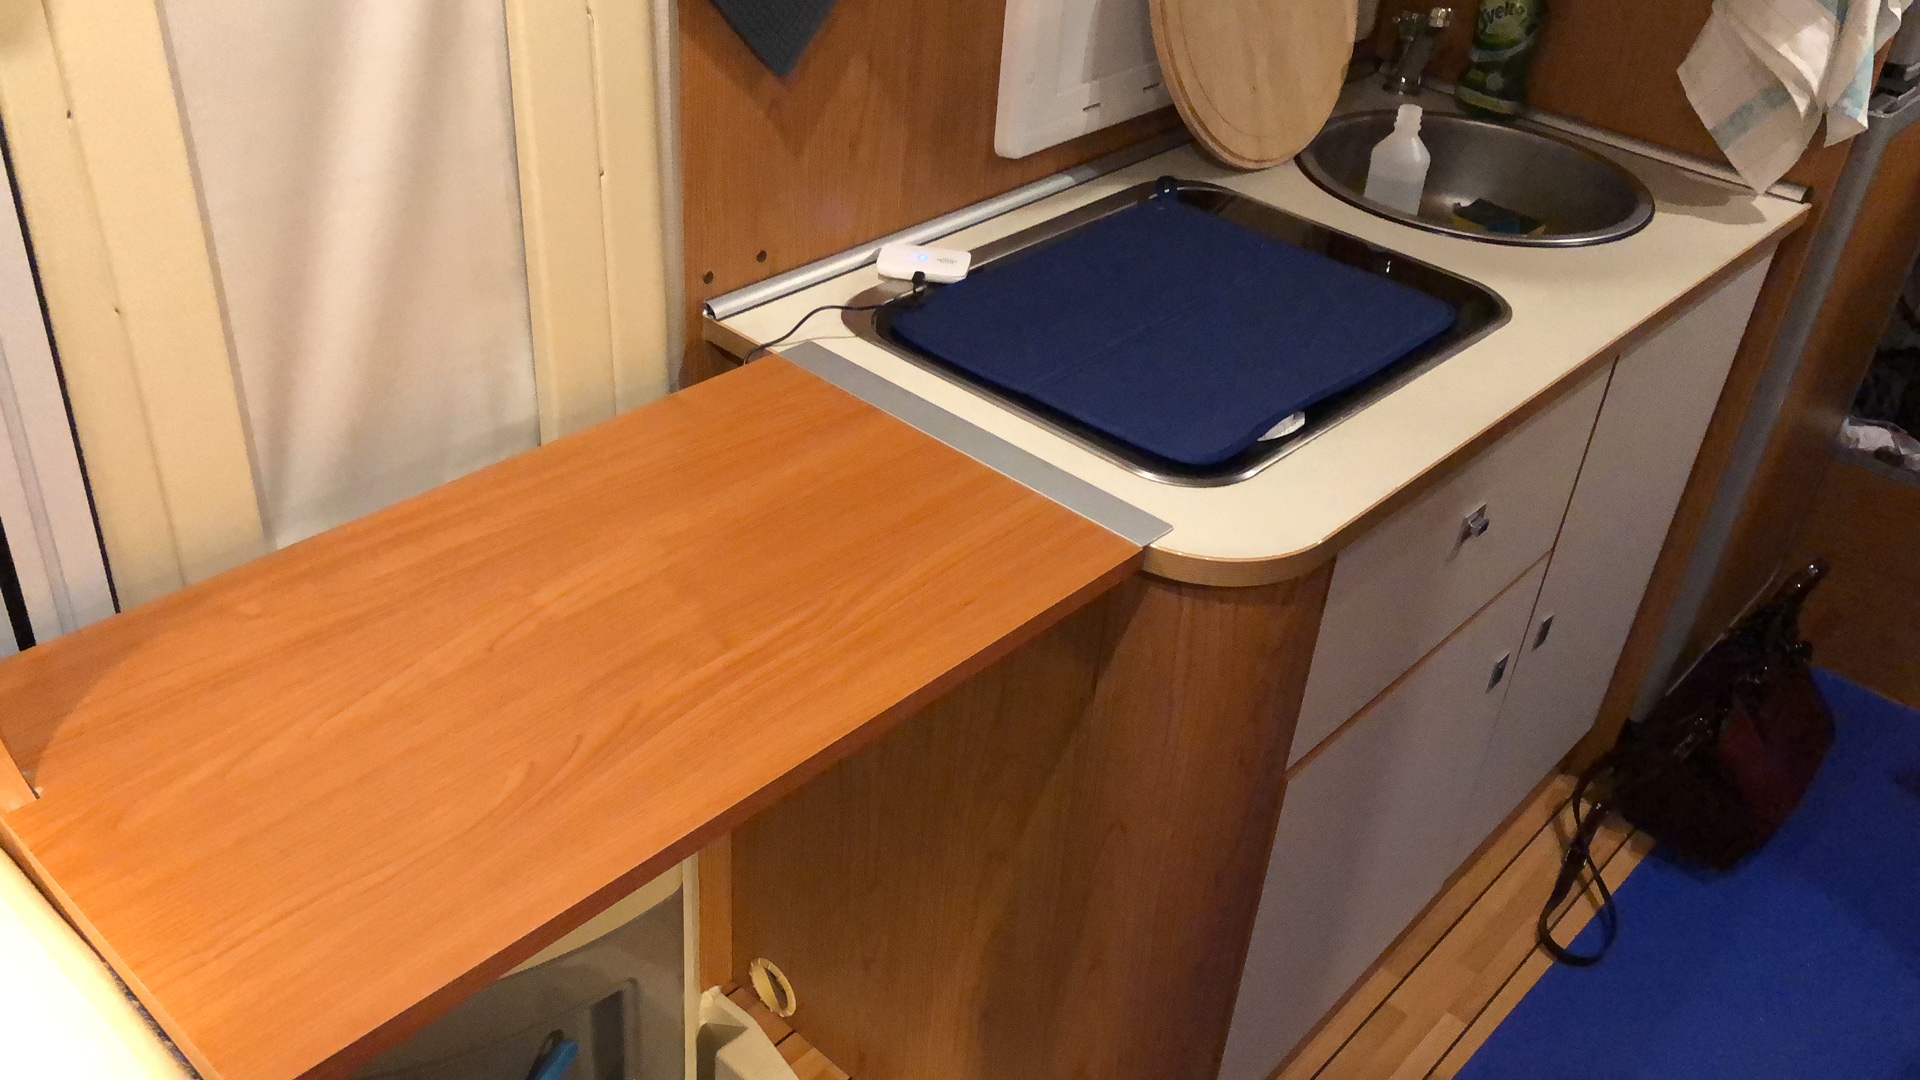 An extension for the kitchen table of my RV